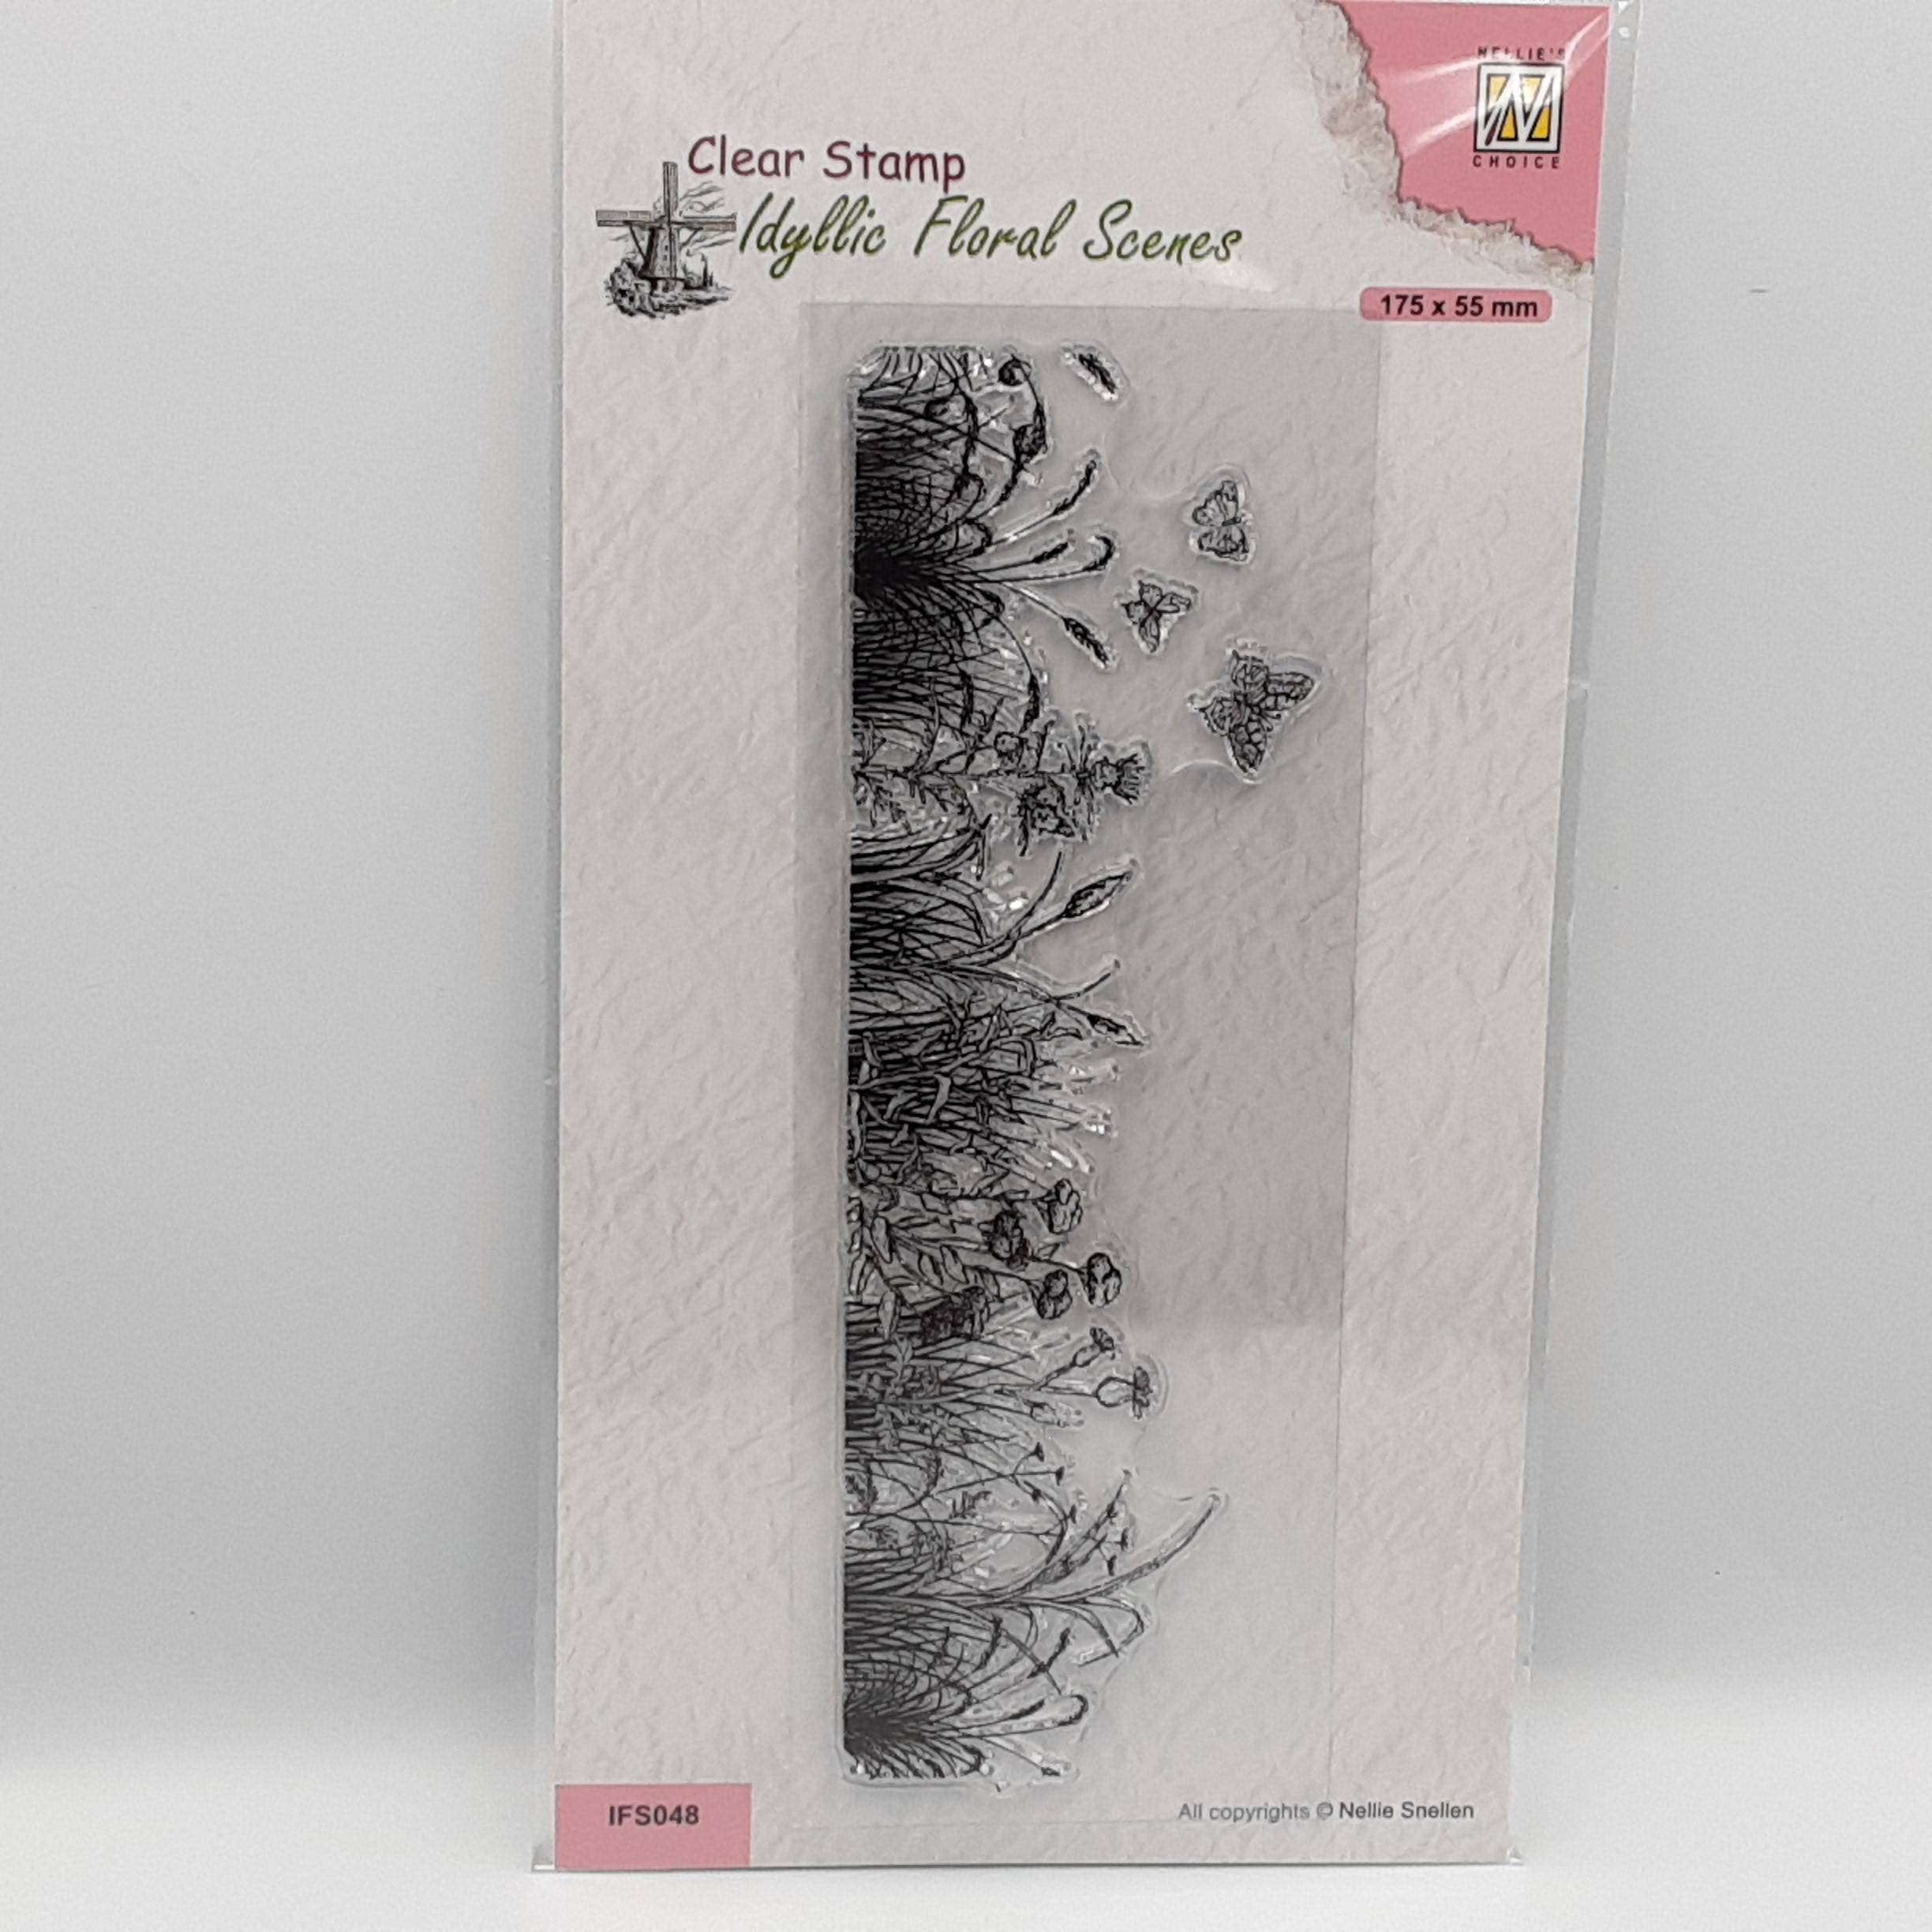 Meadow with butterflies idyllic floral slimline clear stamp